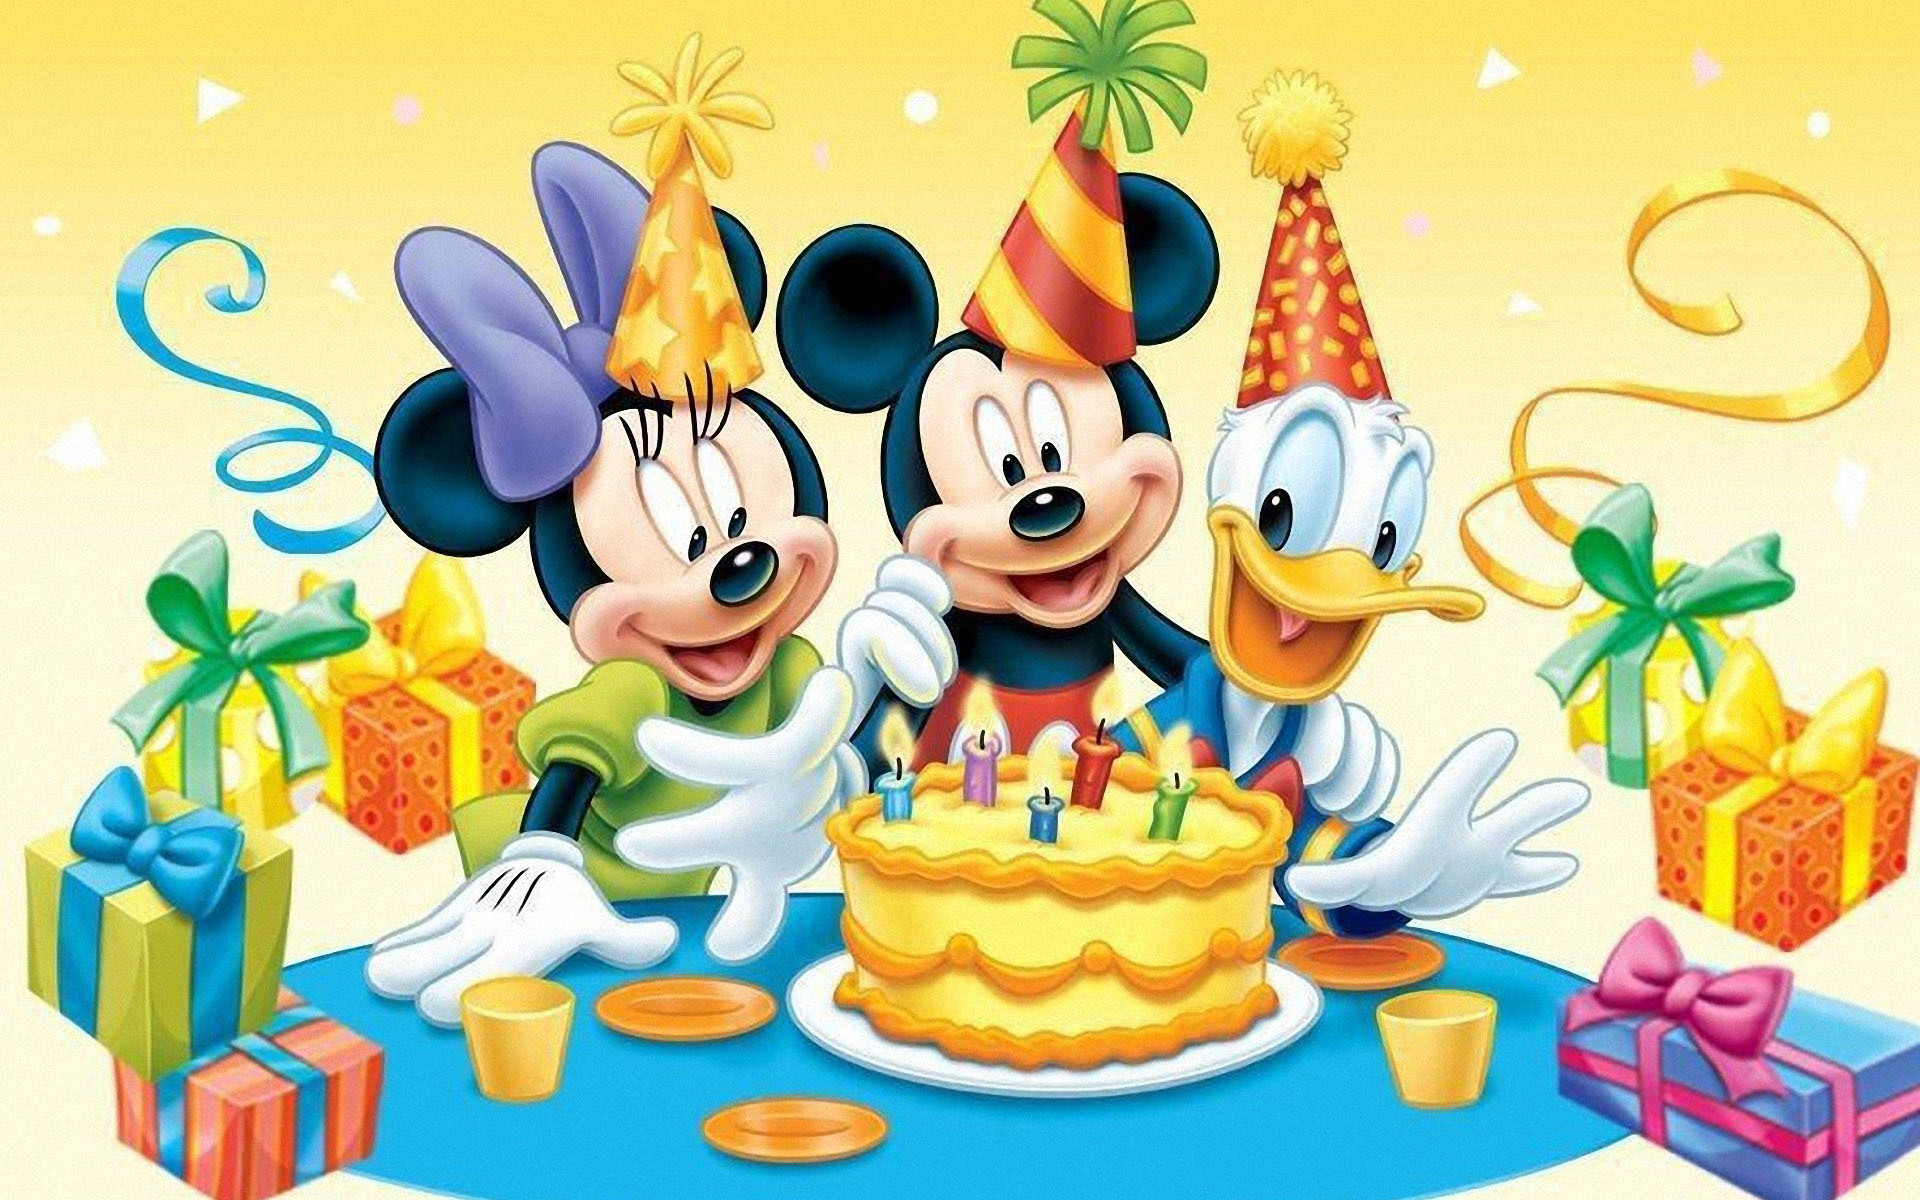 Cartoon characters on birthday wallpapers and images - wallpapers ...